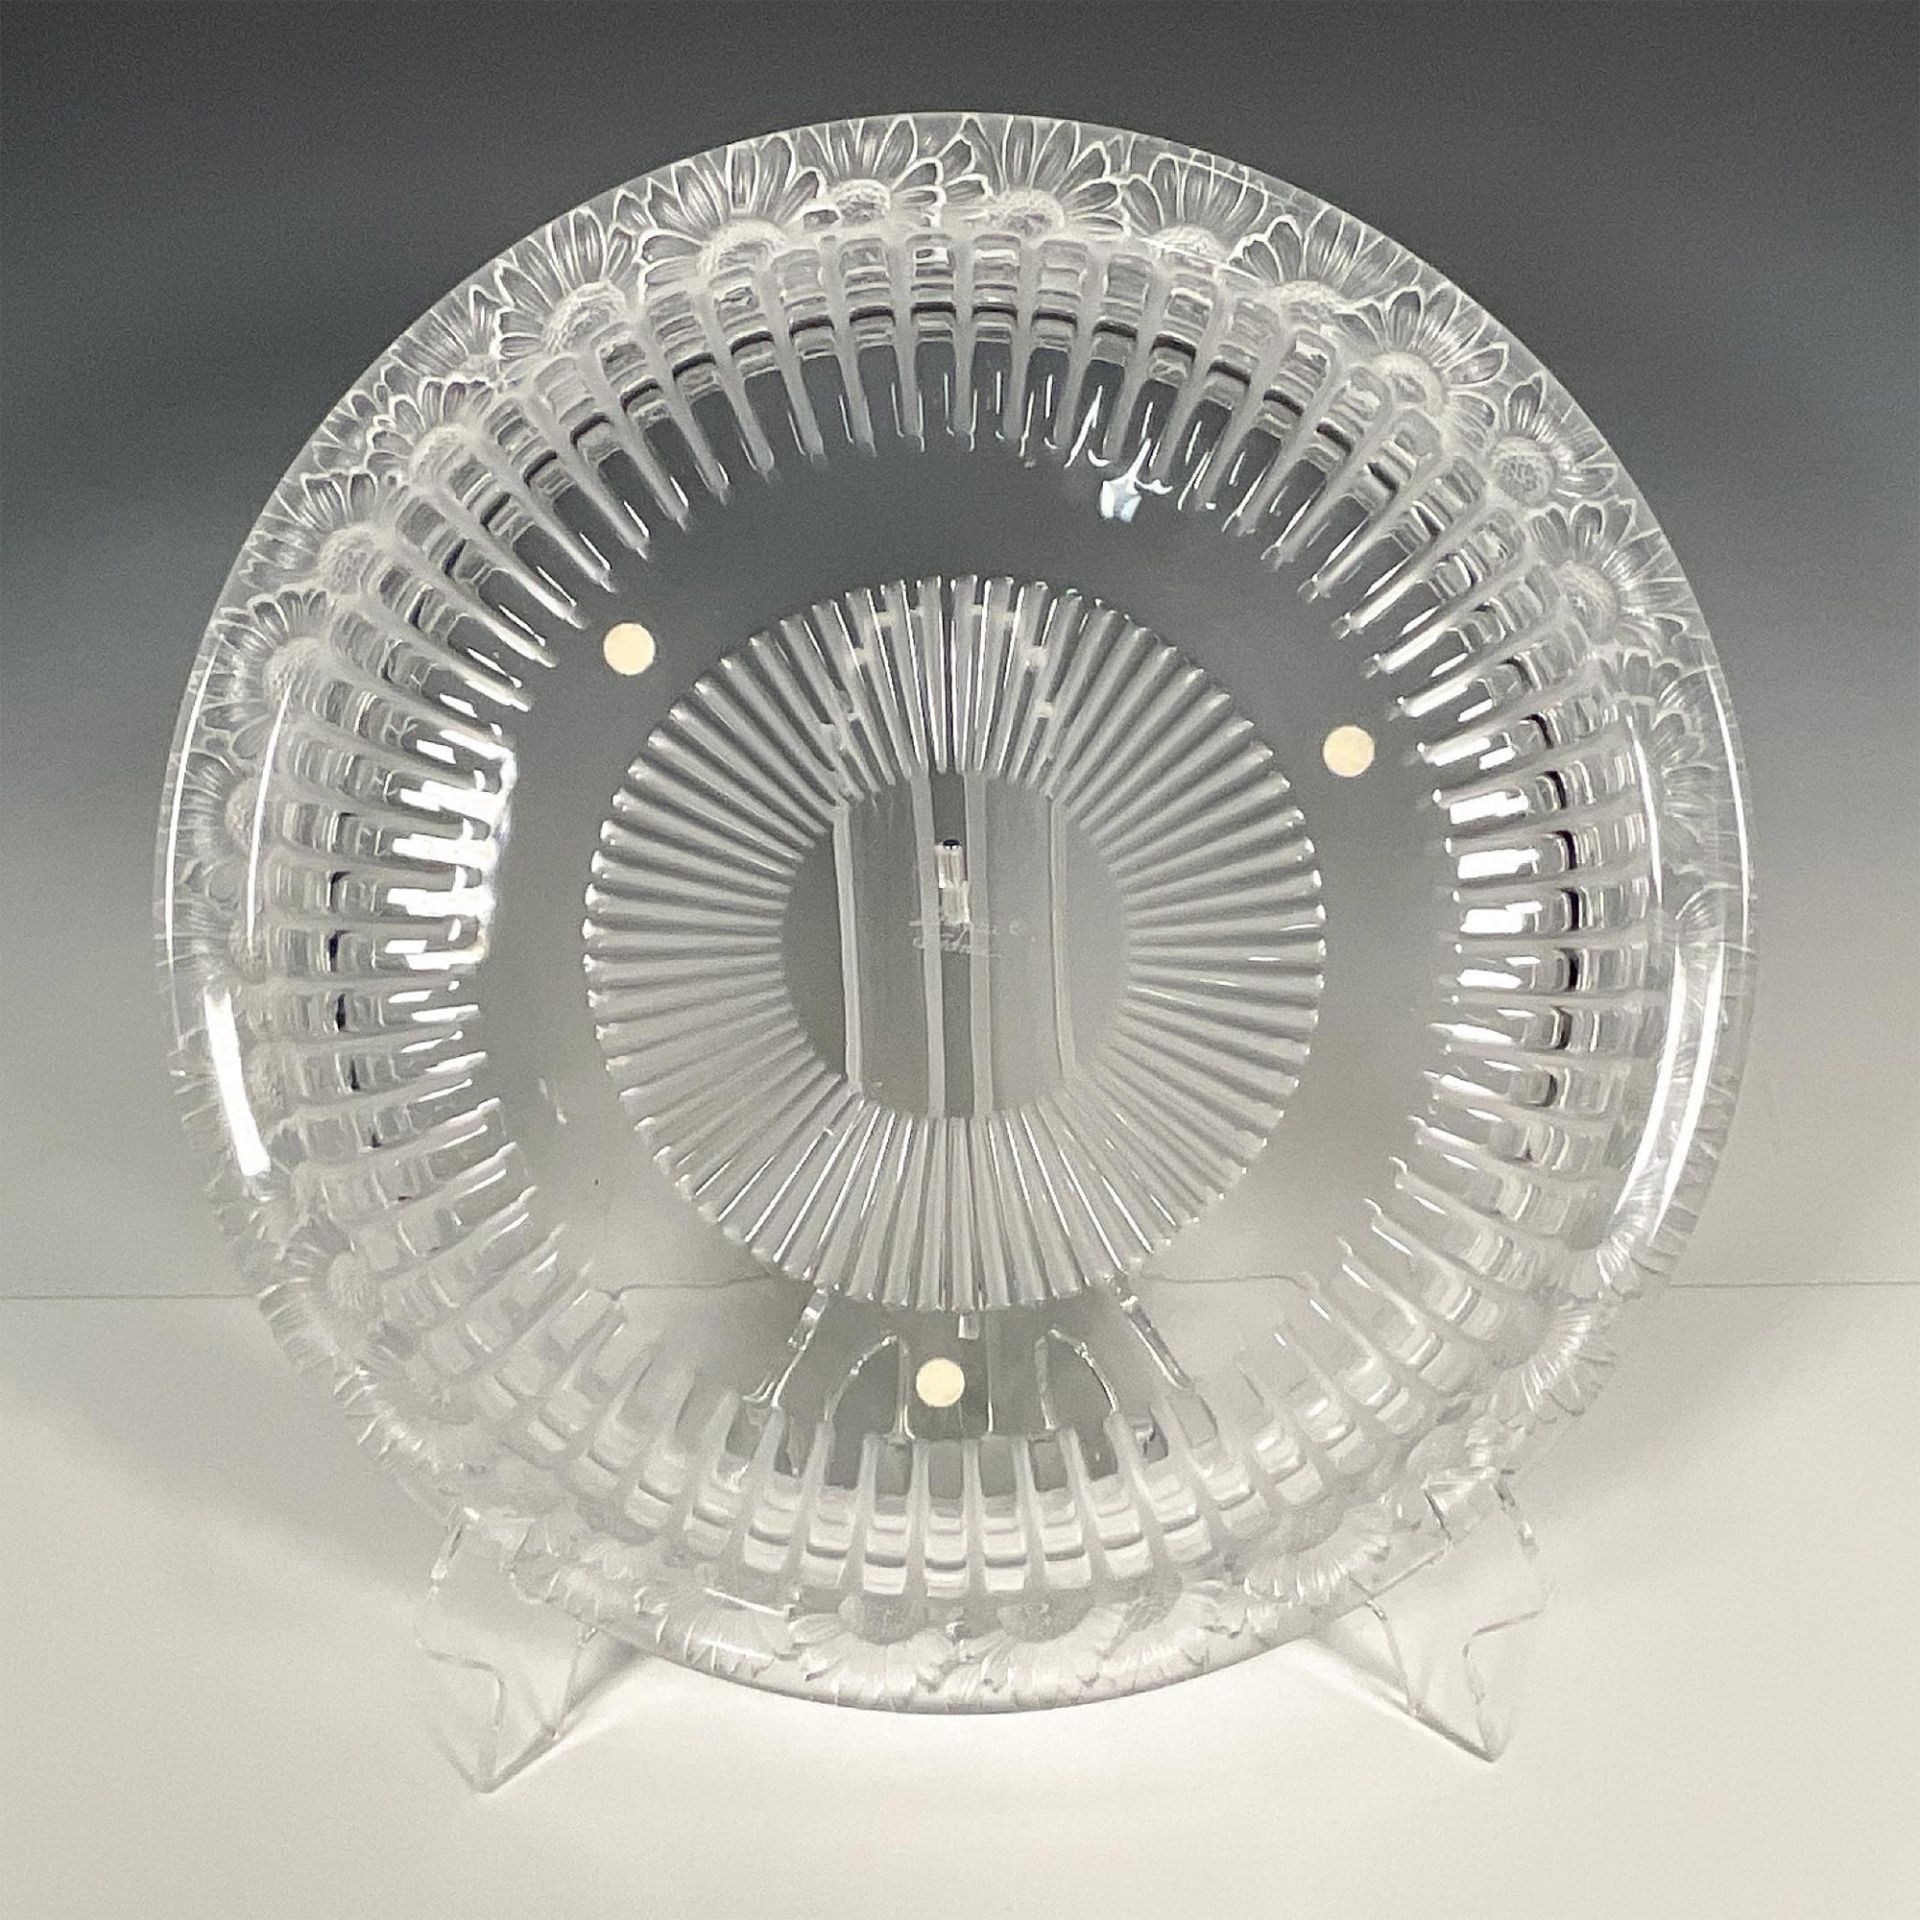 Lalique Crystal Decorative Bowl - Image 3 of 3